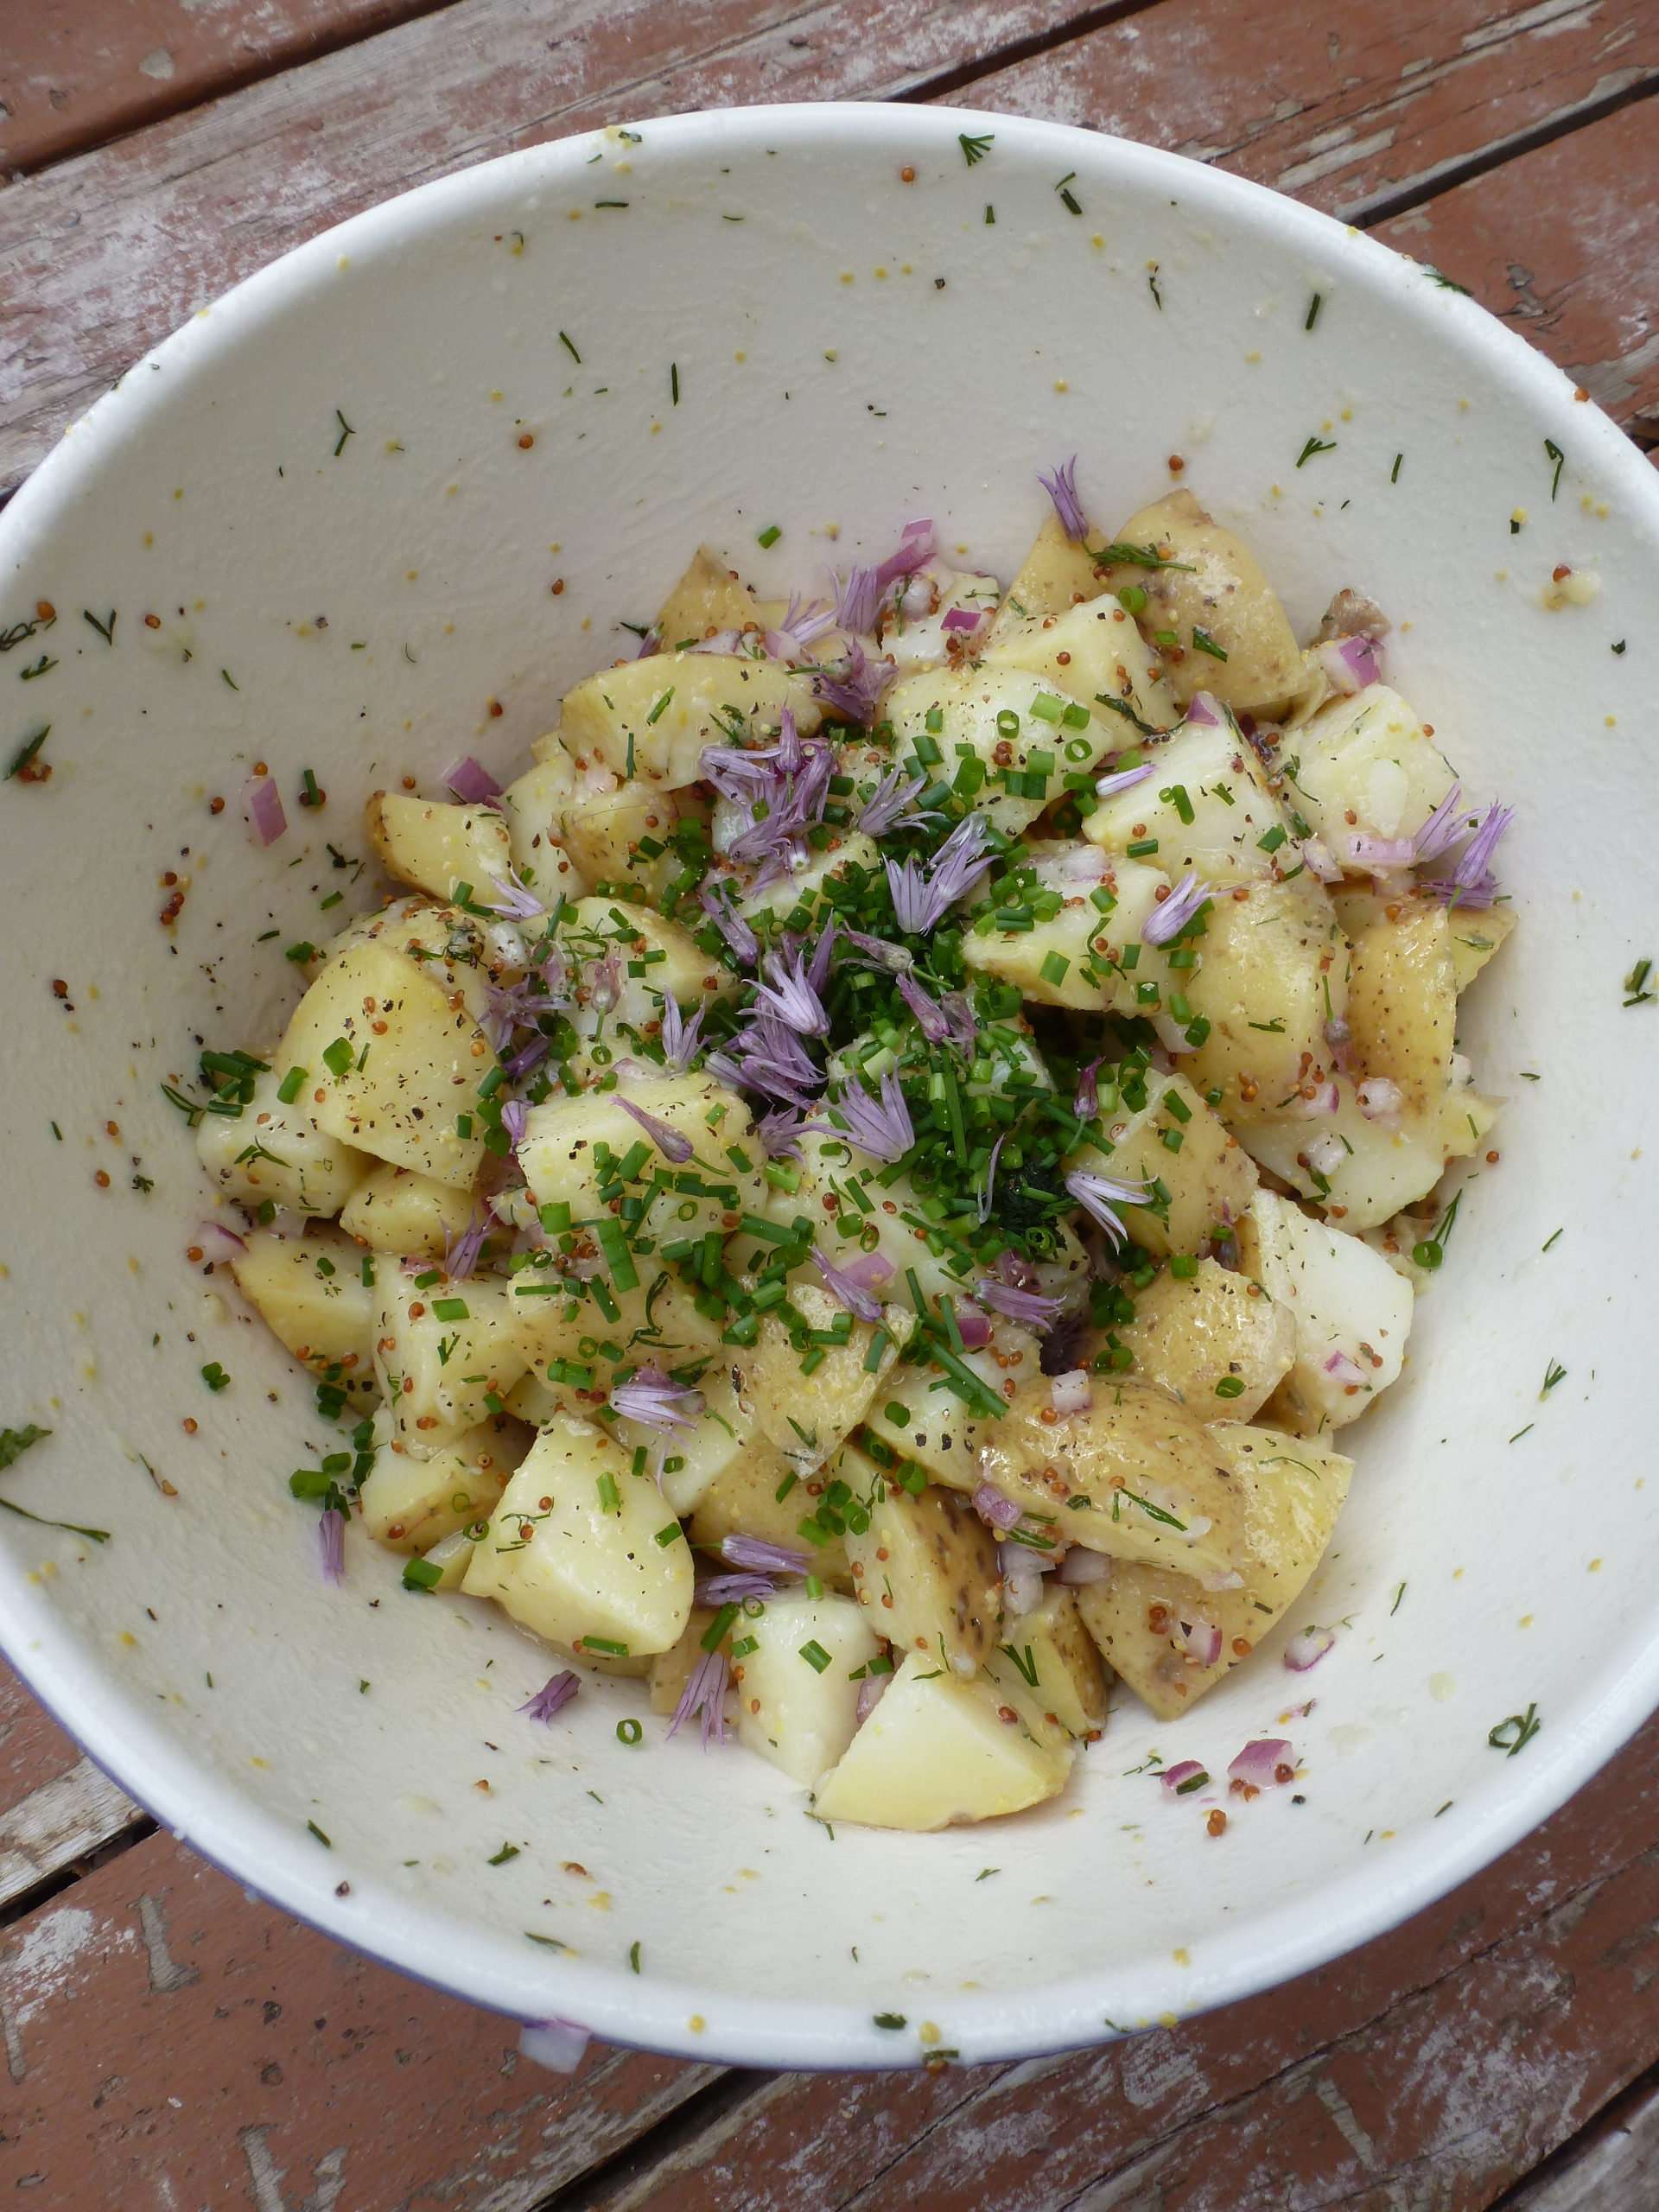 A bowl of potato salad, with lots of chives